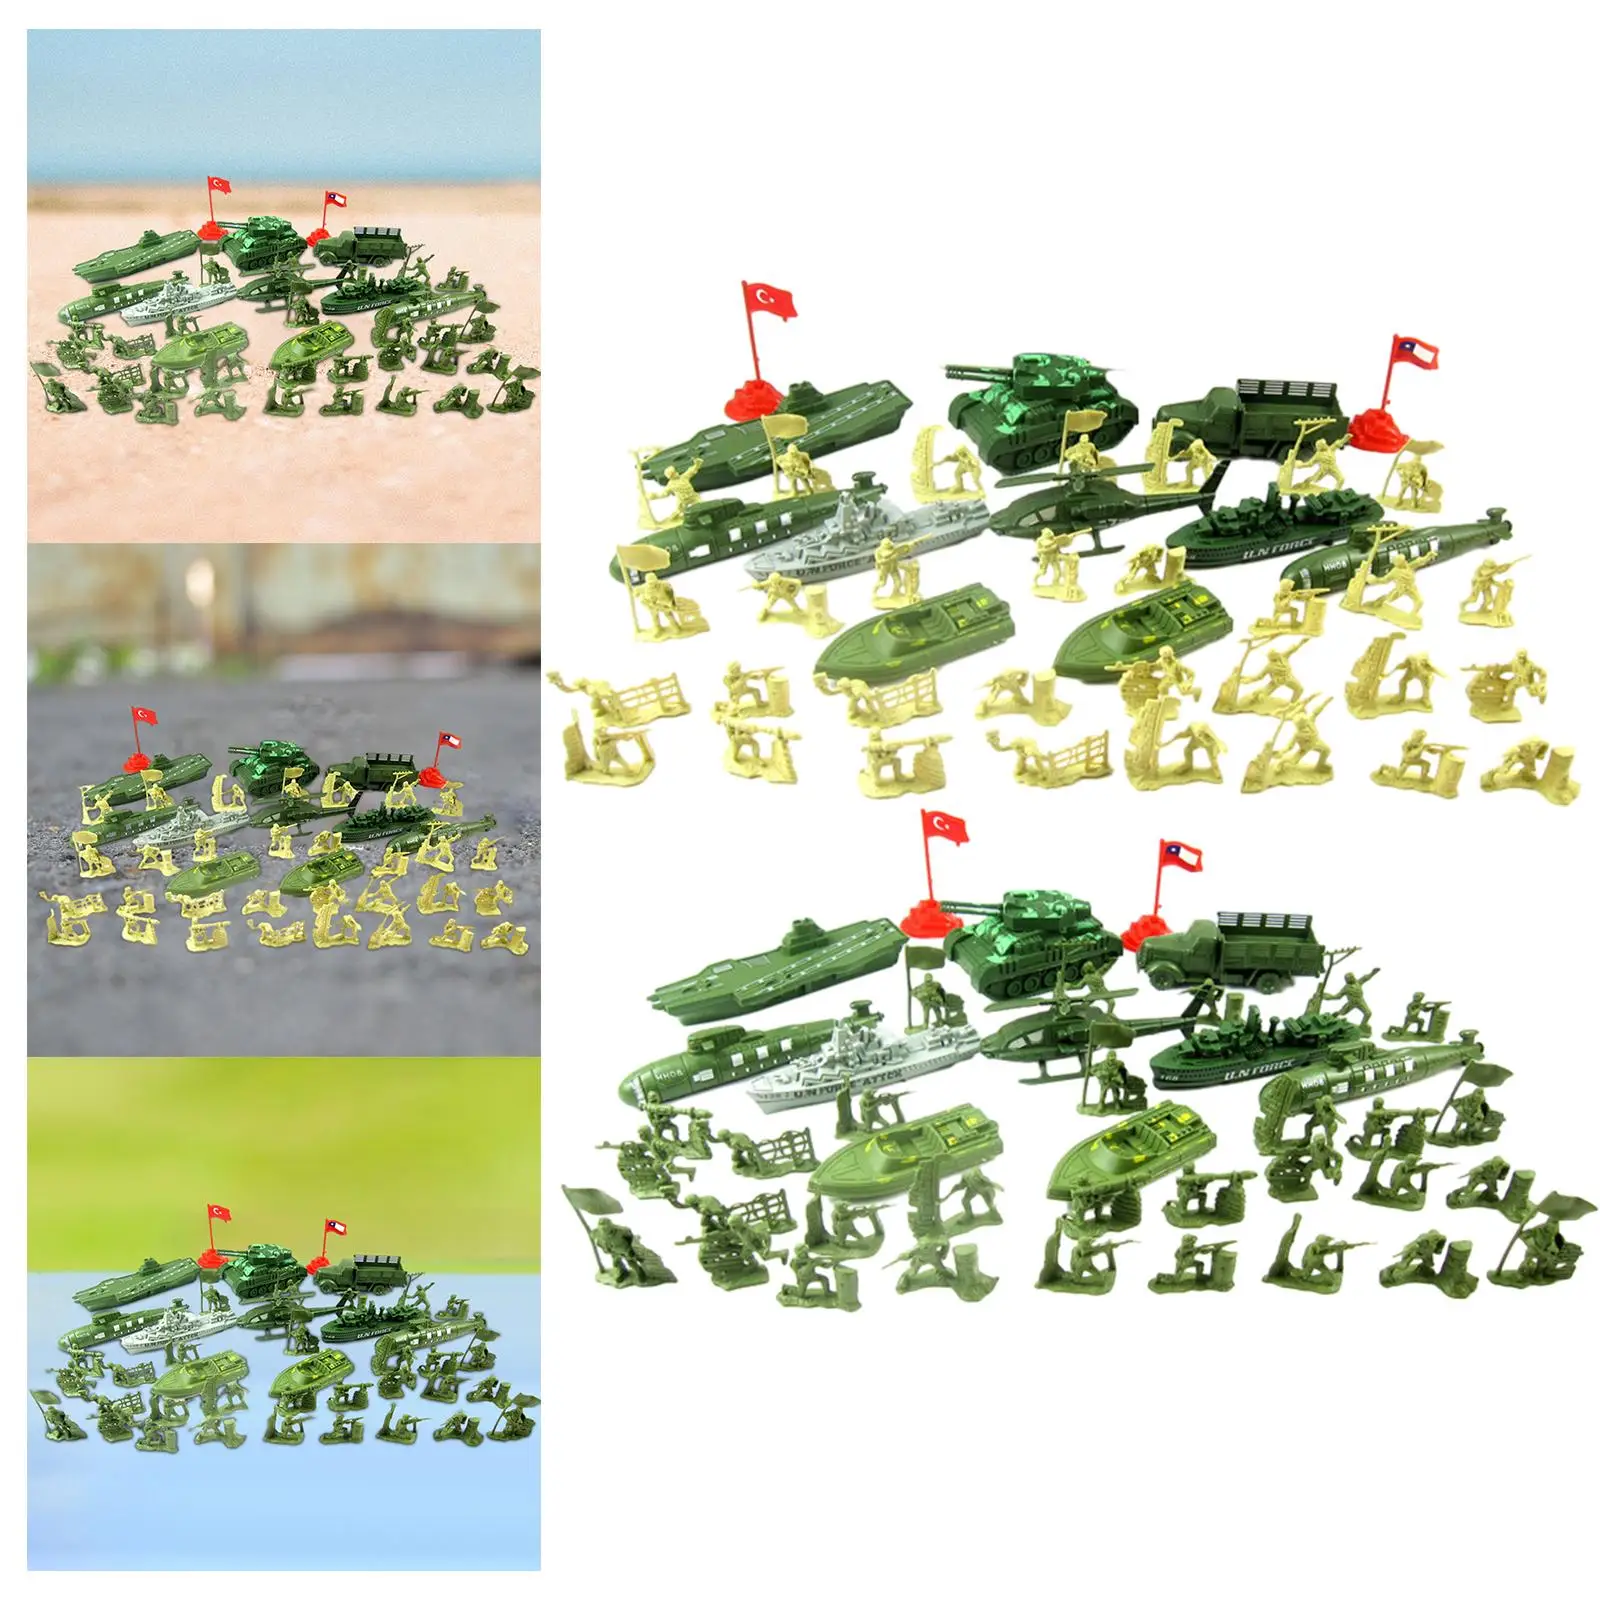 52x Model Soldier Figures Battle Scene Diorama Mini Playset with Tank Vehicle Accessories for Children Kids Adults Boys Teens